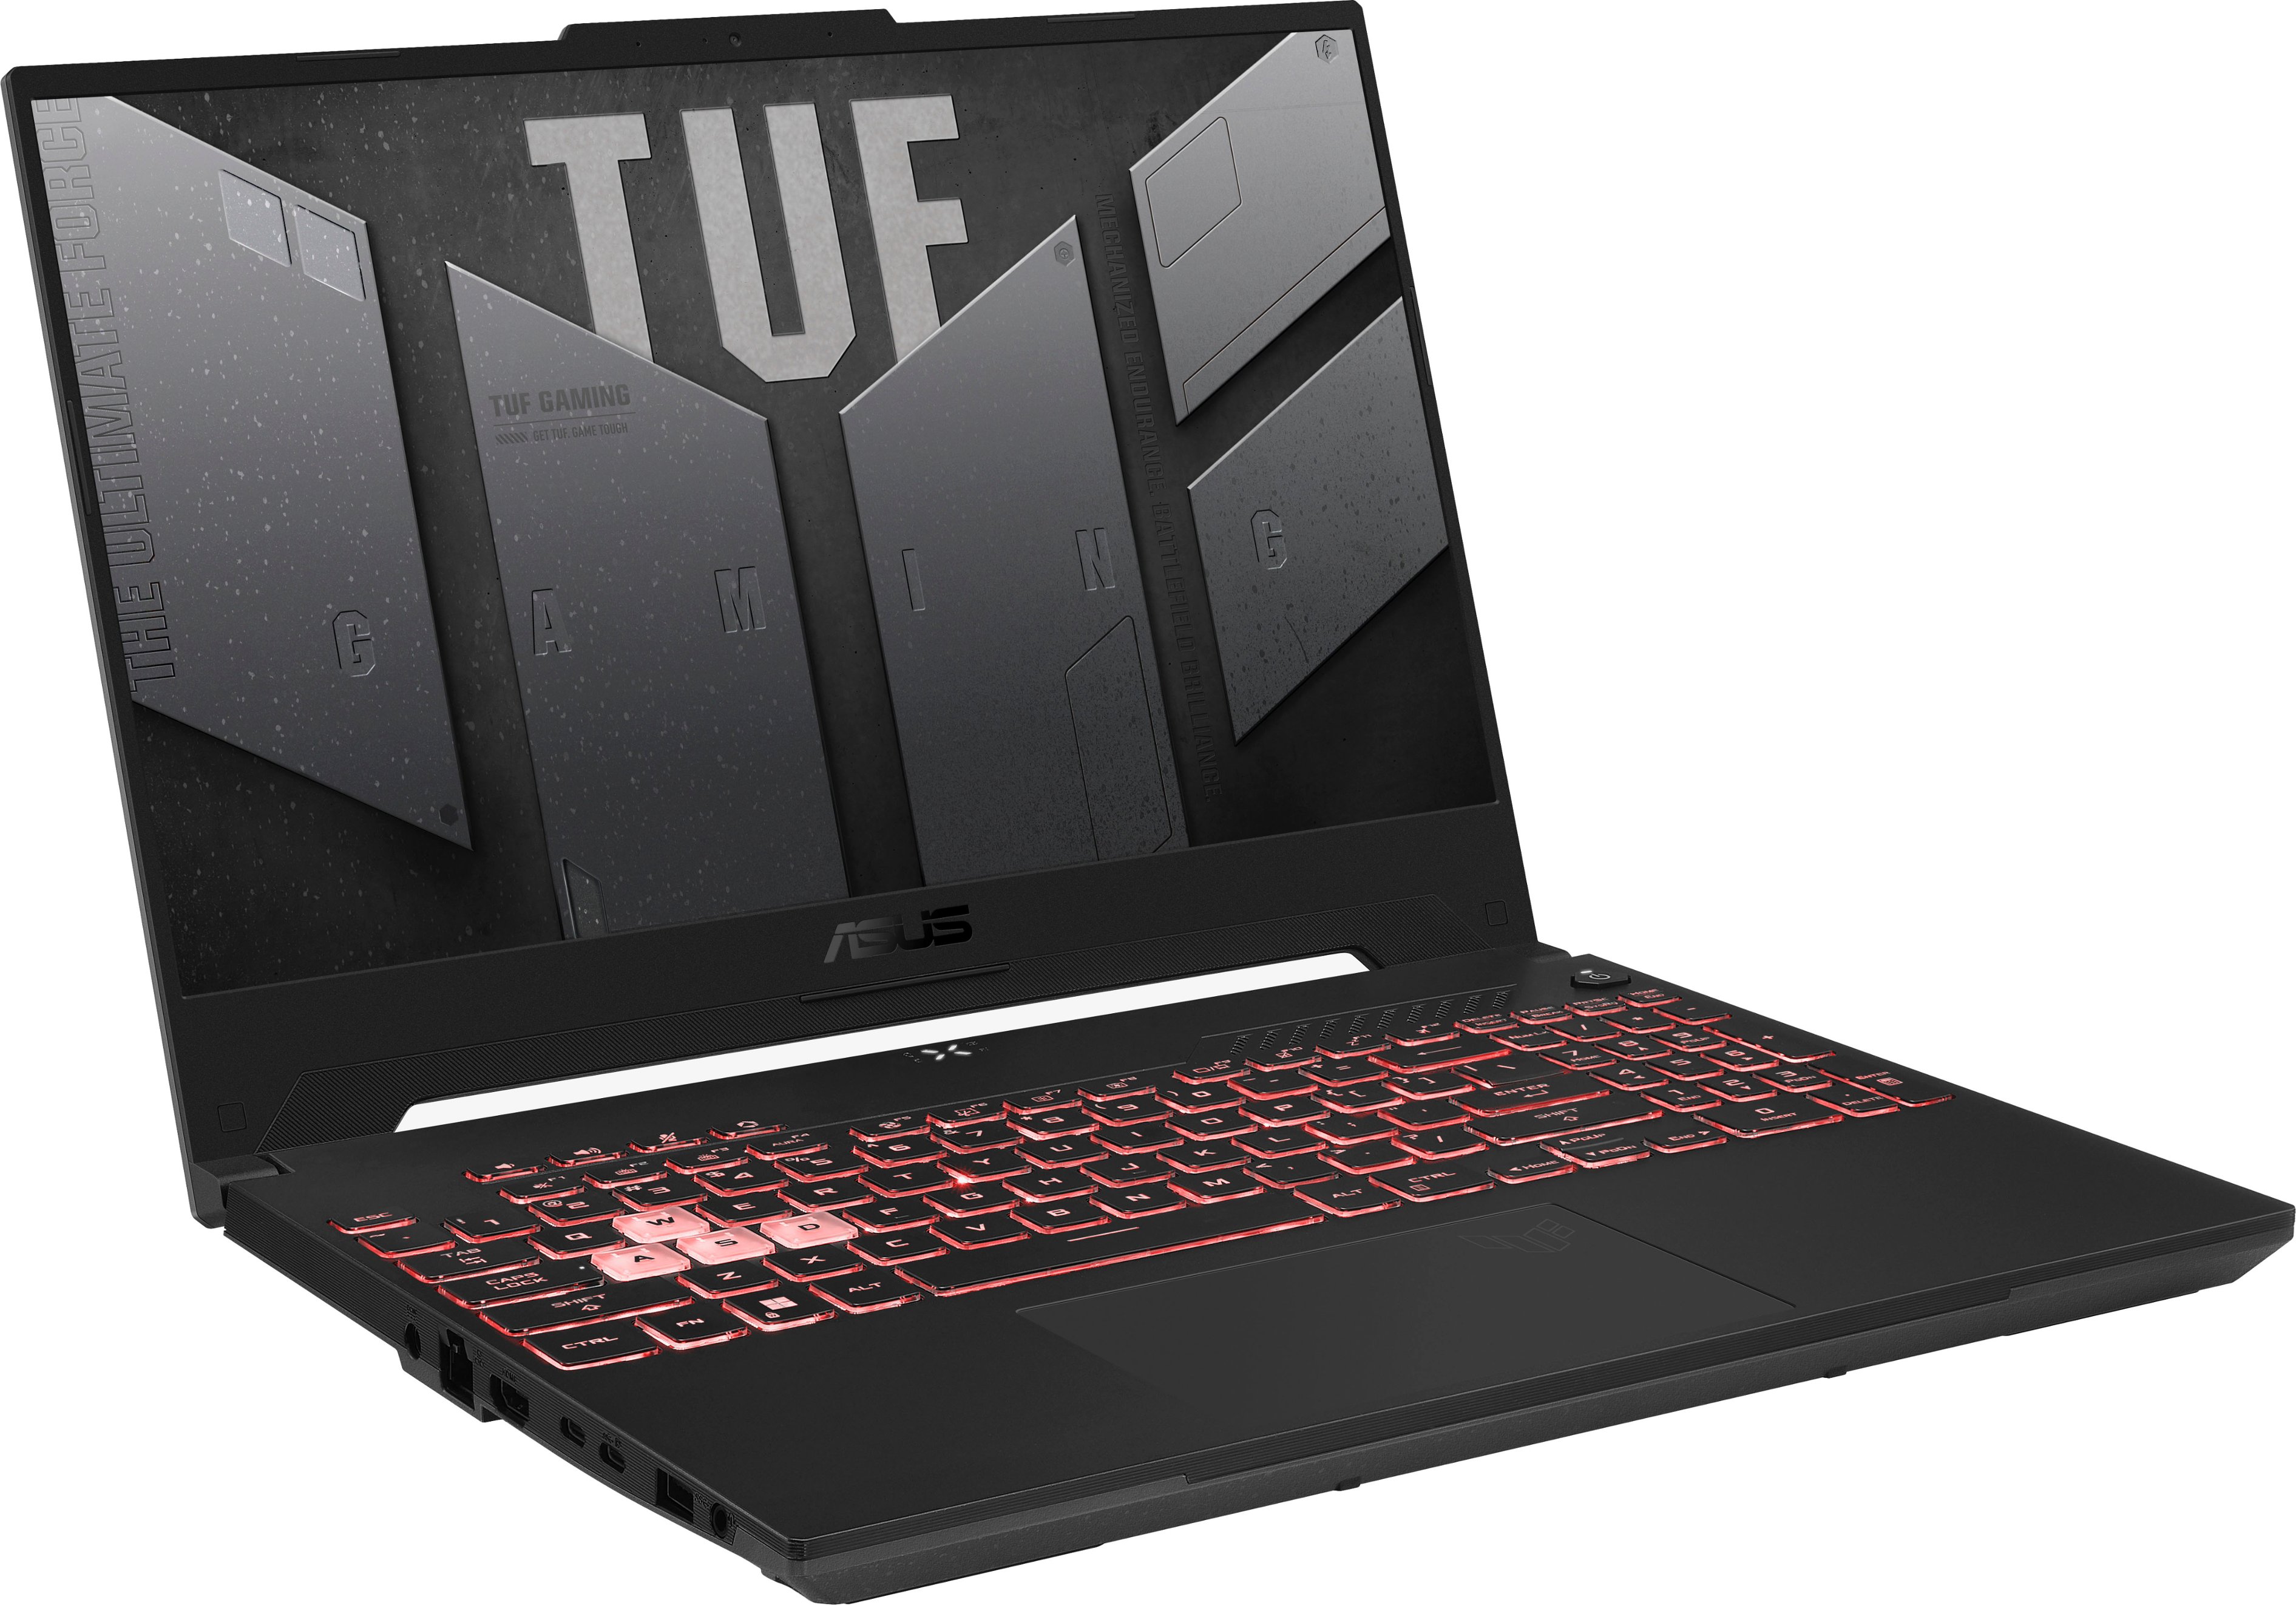 Angle View: ASUS - TUF Gaming A15 15.6" FHD 144Hz Gaming Laptop-AMD Ryzen 7-8GB DDR5 Memory-NVIDIA GeForce RTX 3050 Ti-512GB PCIe SSD - Gray